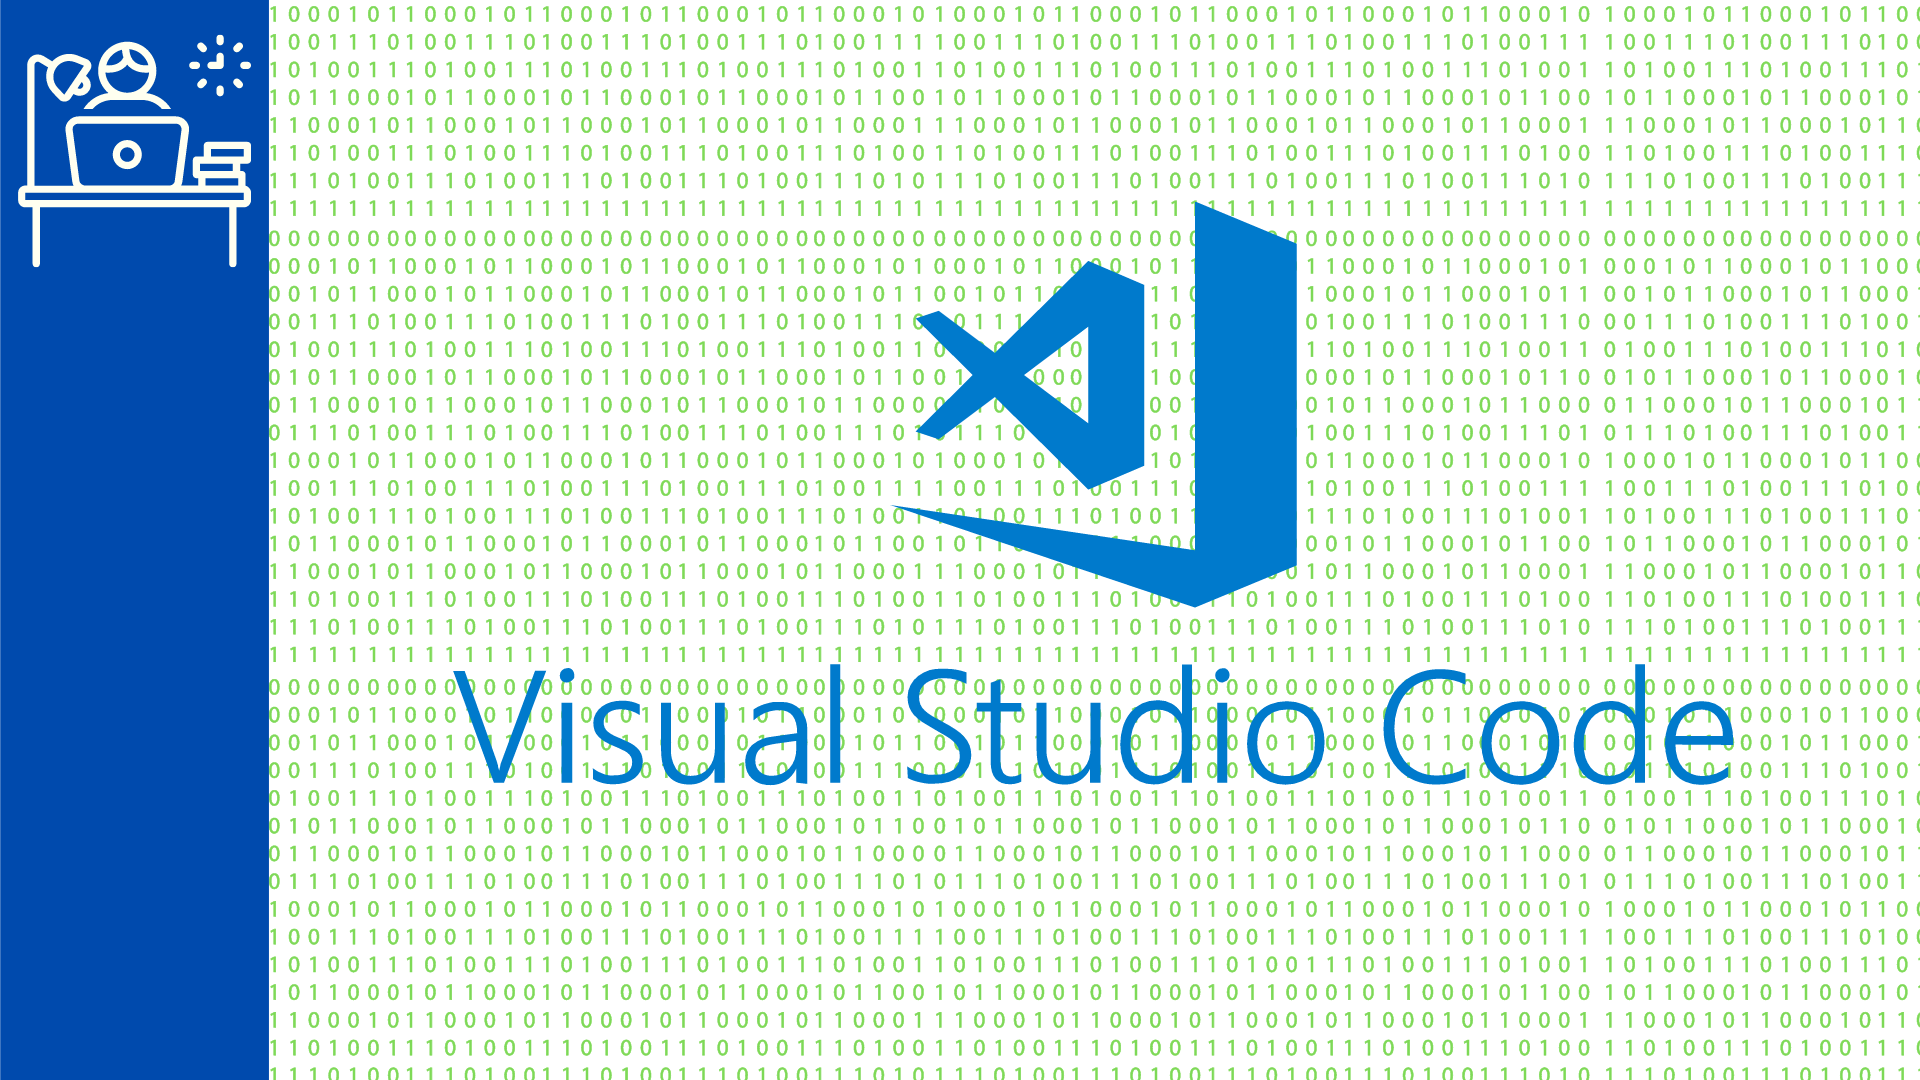 9 Things To Boost Your Workflow in Visual Studio Code